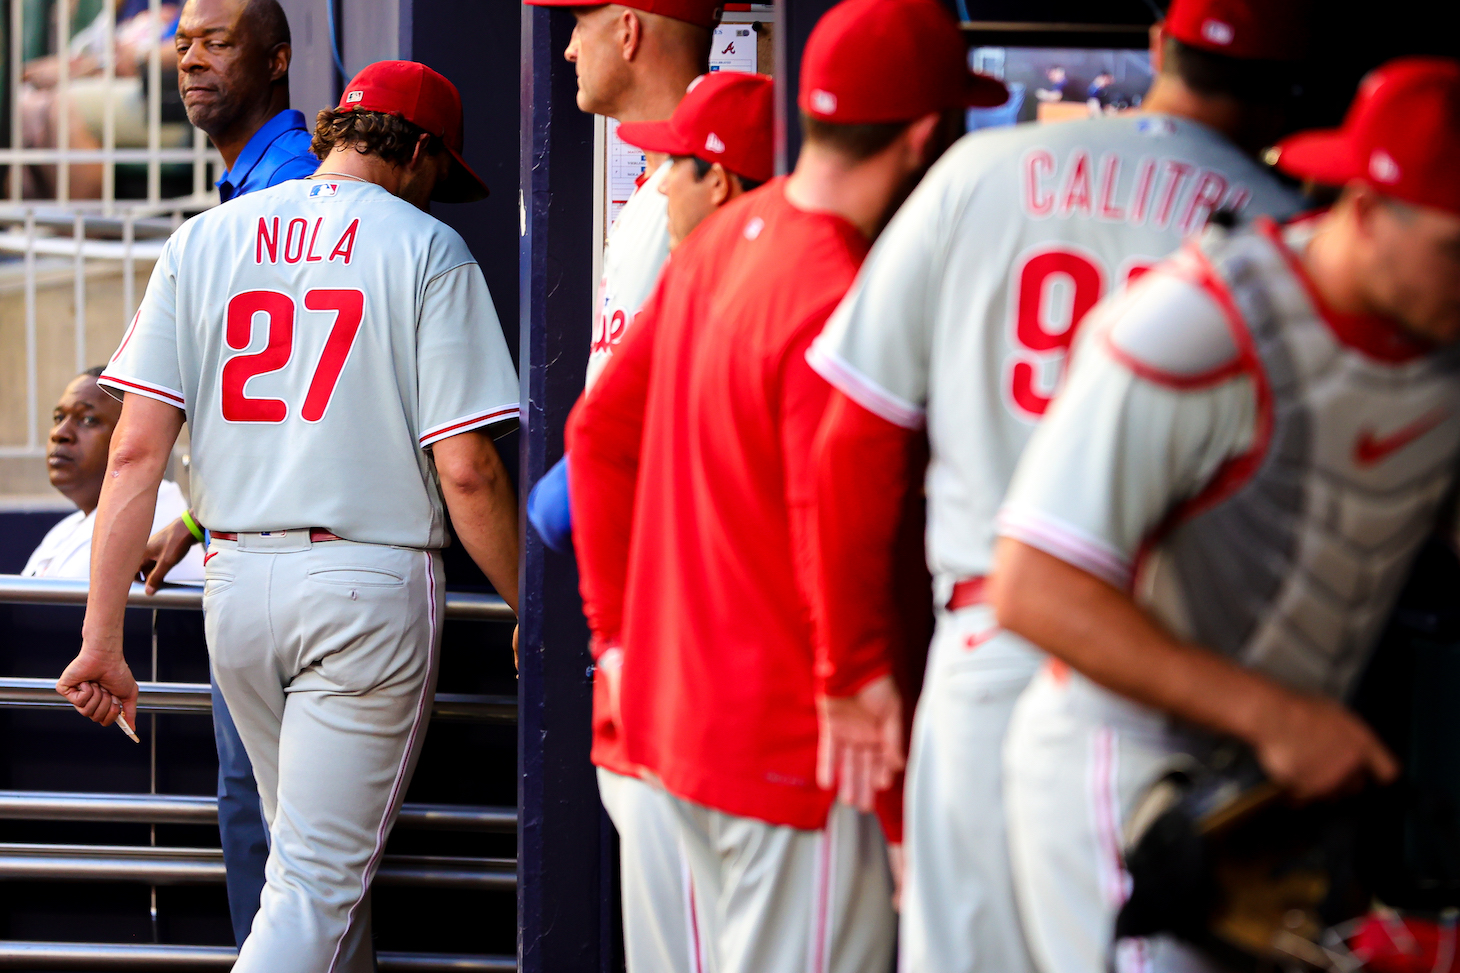 ATLANTA, GA - SEPTEMBER 17: Aaron Nola #27 of the Philadelphia Phillies walks back to the clubhouse before a game against the Atlanta Braves at Truist Park on September 17, 2022 in Atlanta, Georgia. (Photo by Casey Sykes/Getty Images)